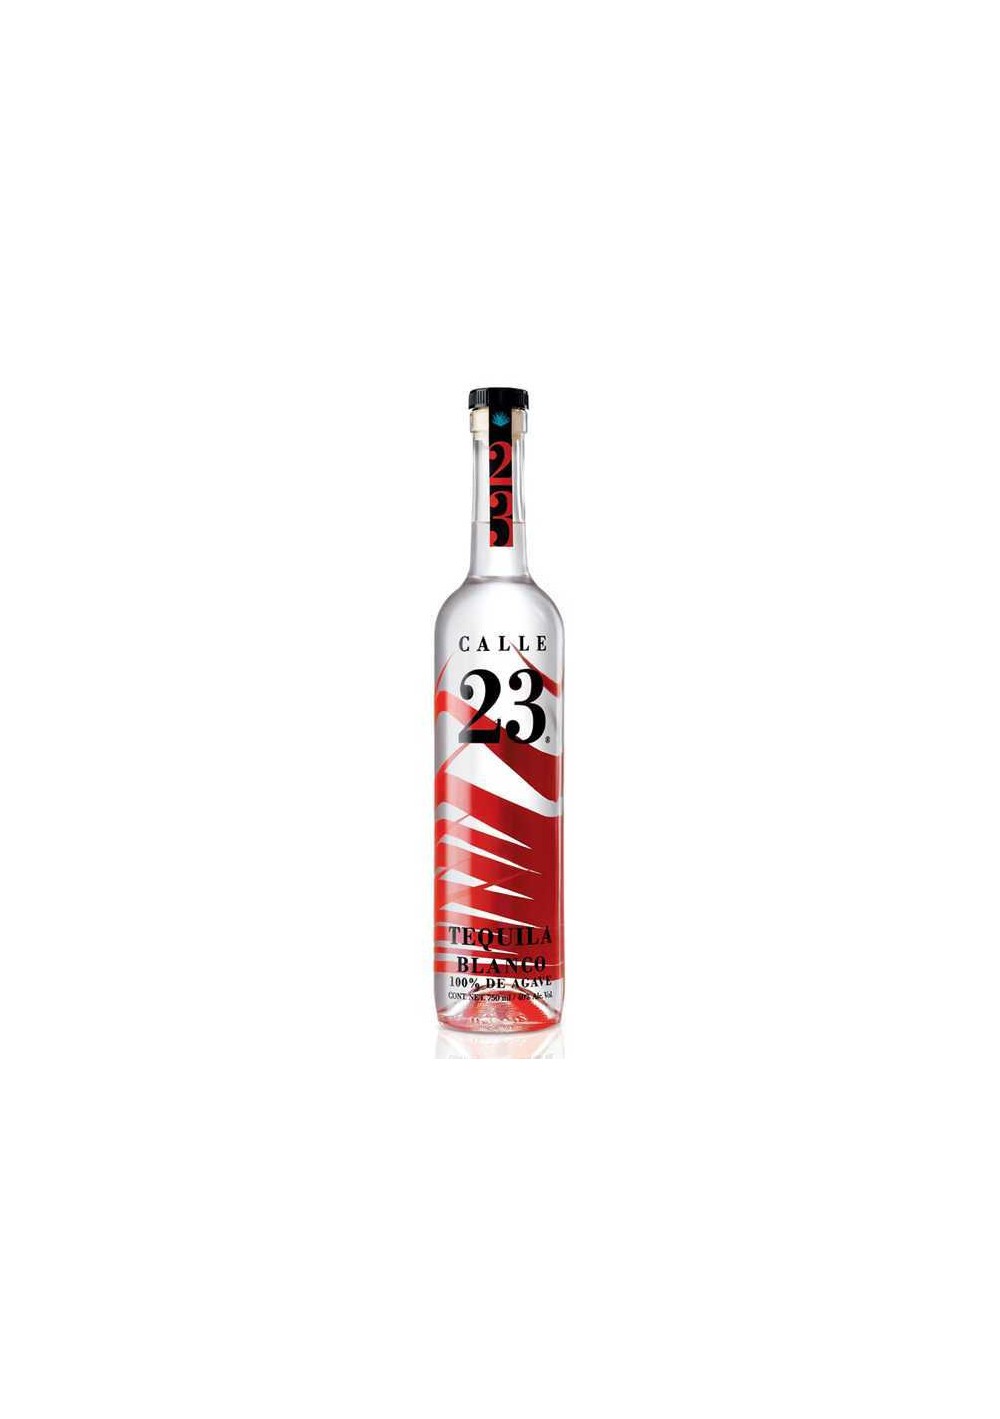 Calle 23 - Tequila Blanco - (50cl)